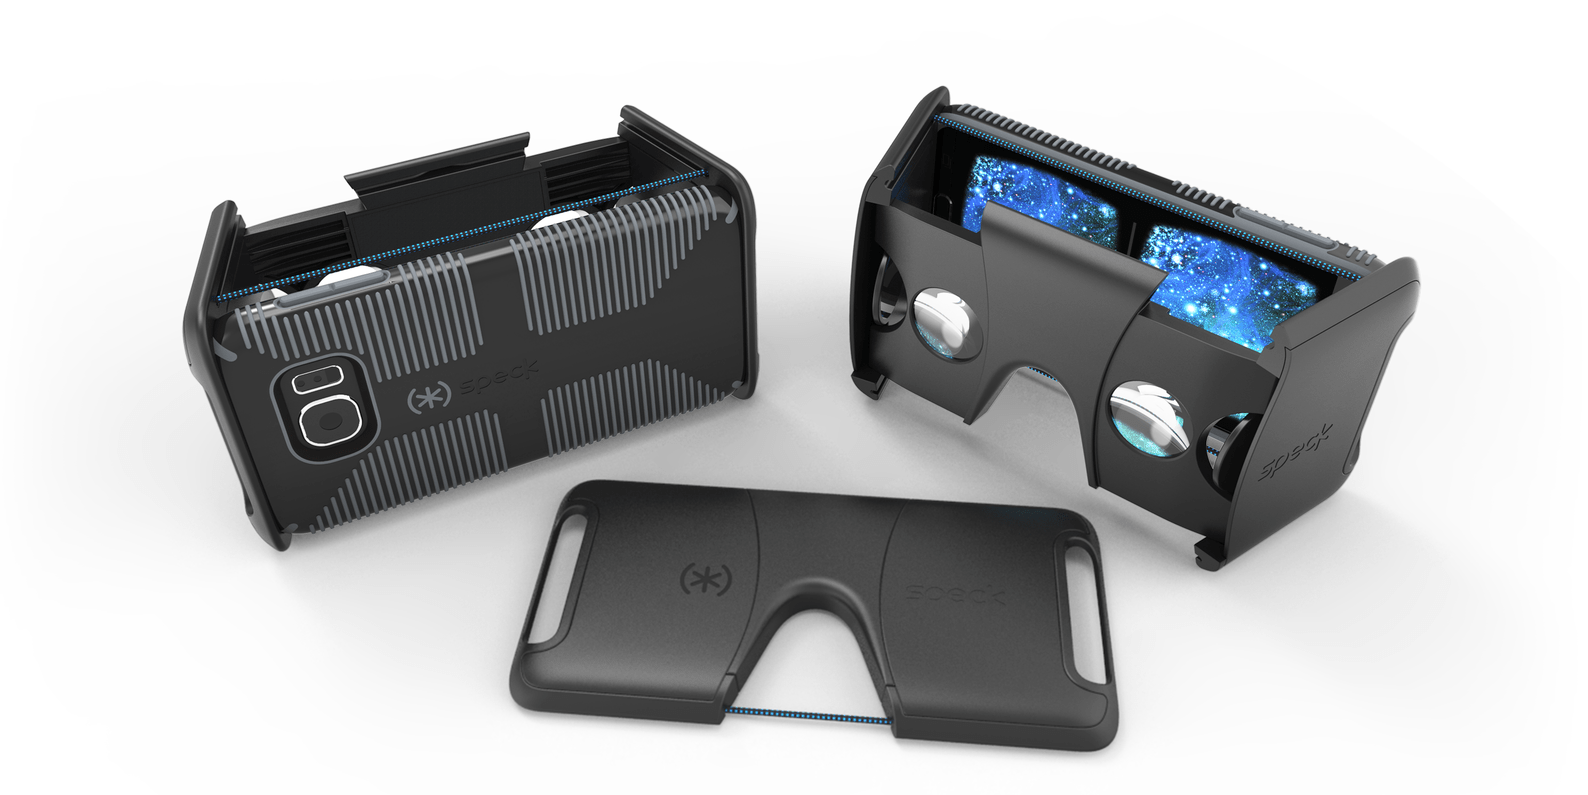 Speck unveils the ultra-portable Pocket VR viewer compatible with iPhone.